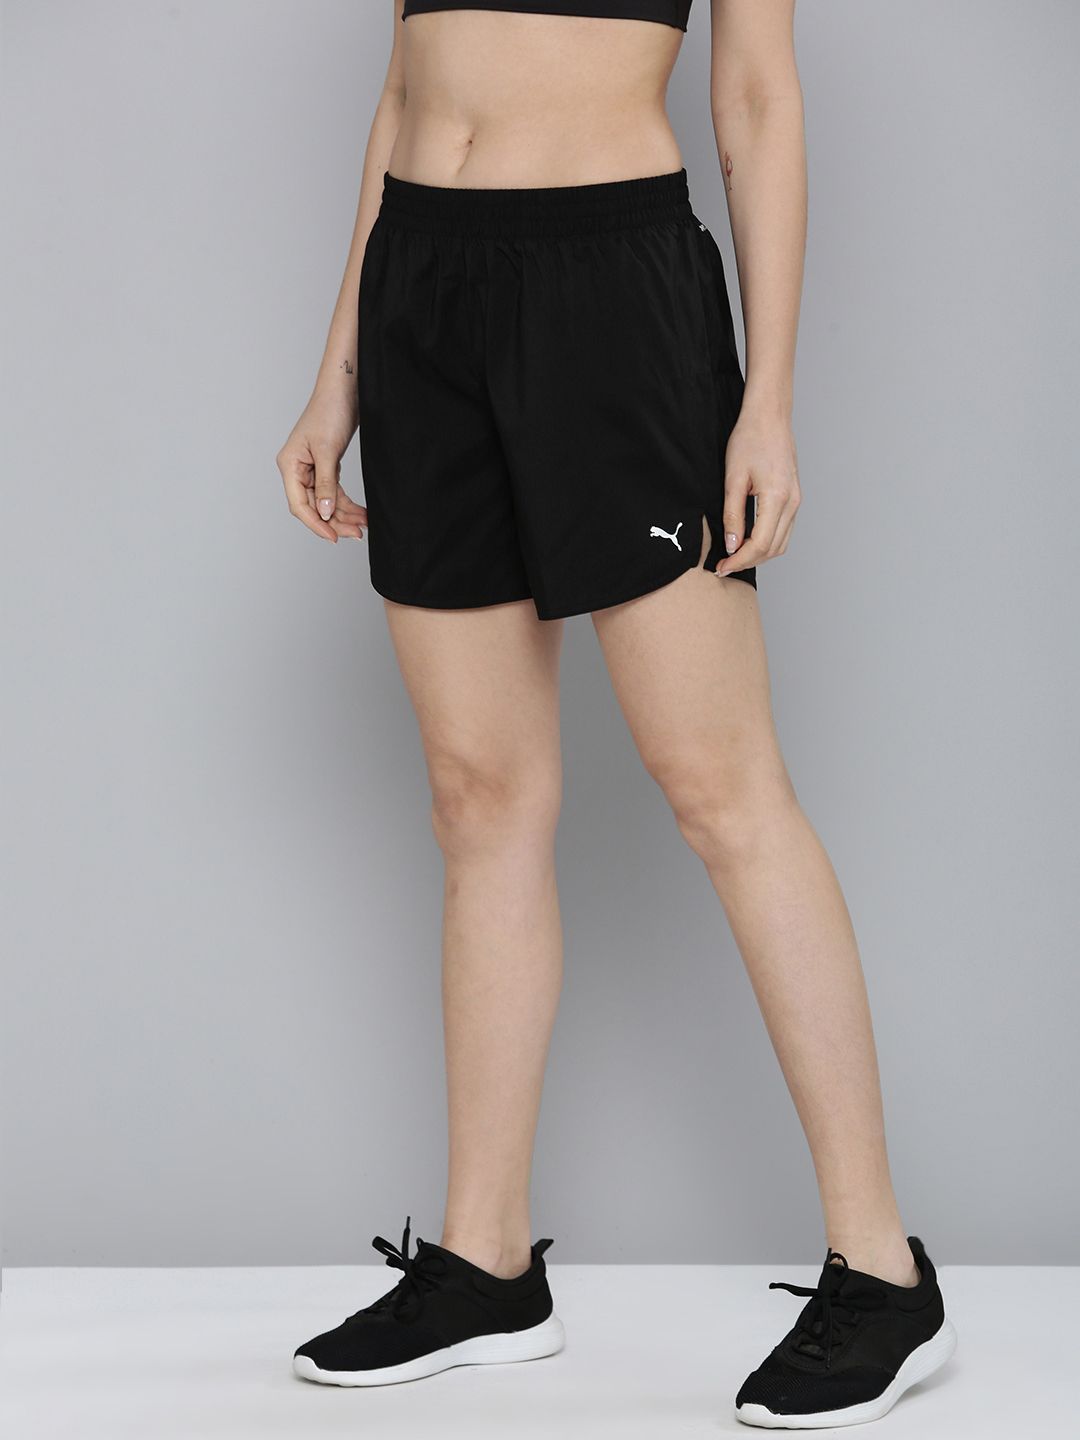 Puma Women Fav Woven 5" dryCELL Running Shorts Price in India